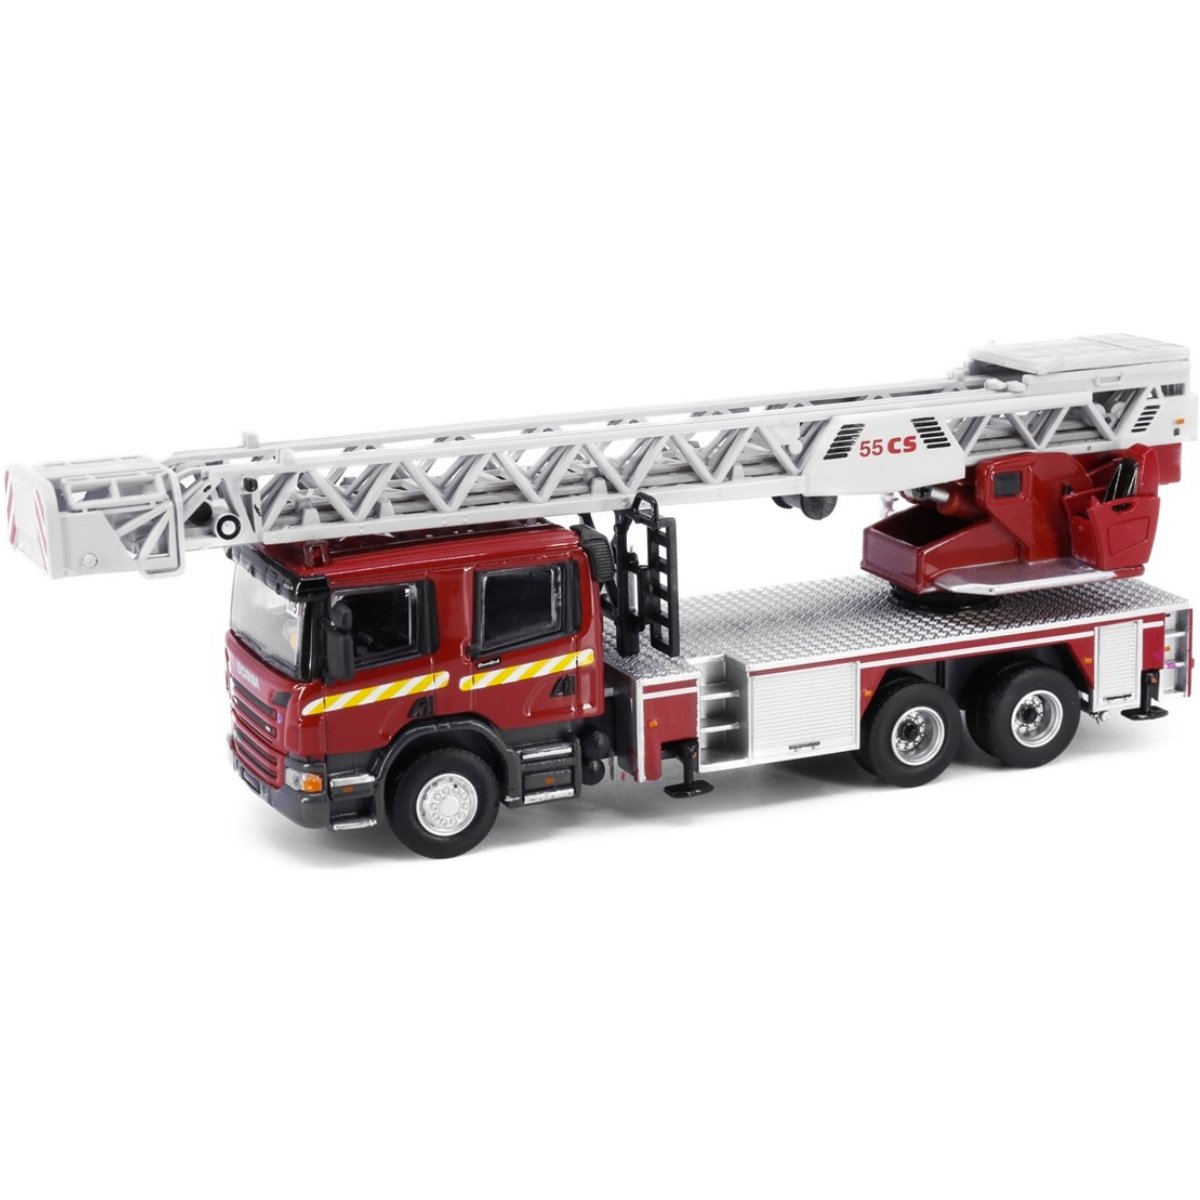 Tiny Models Scania Turntable Ladder 55M (1:76 Scale) - Phillips Hobbies